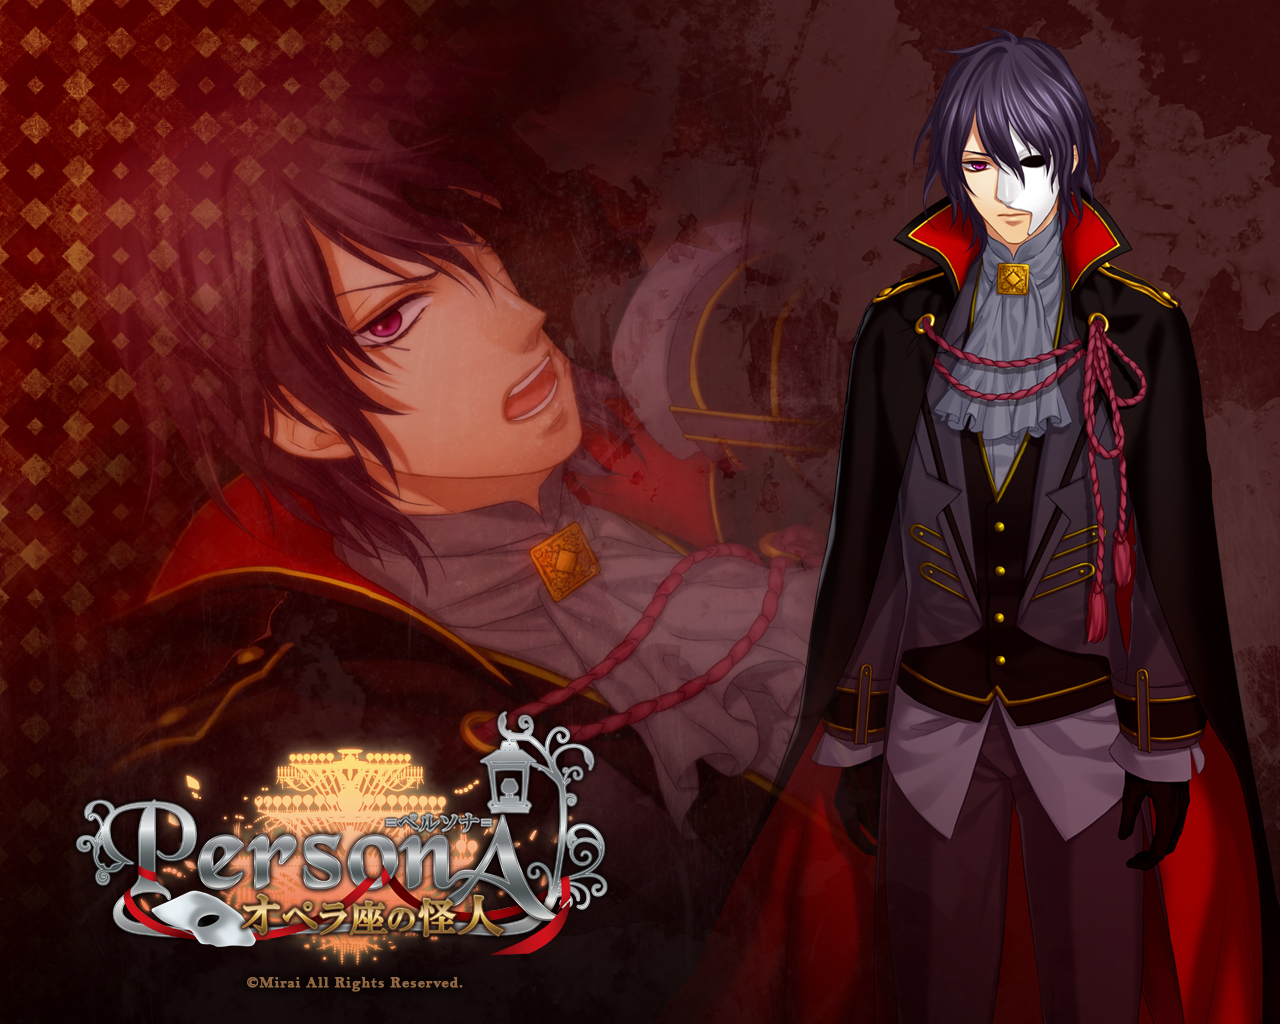 Persona Phantom Of The Opera English Patch Papersfastpower What do you think are the key things people need to know about him? persona phantom of the opera english